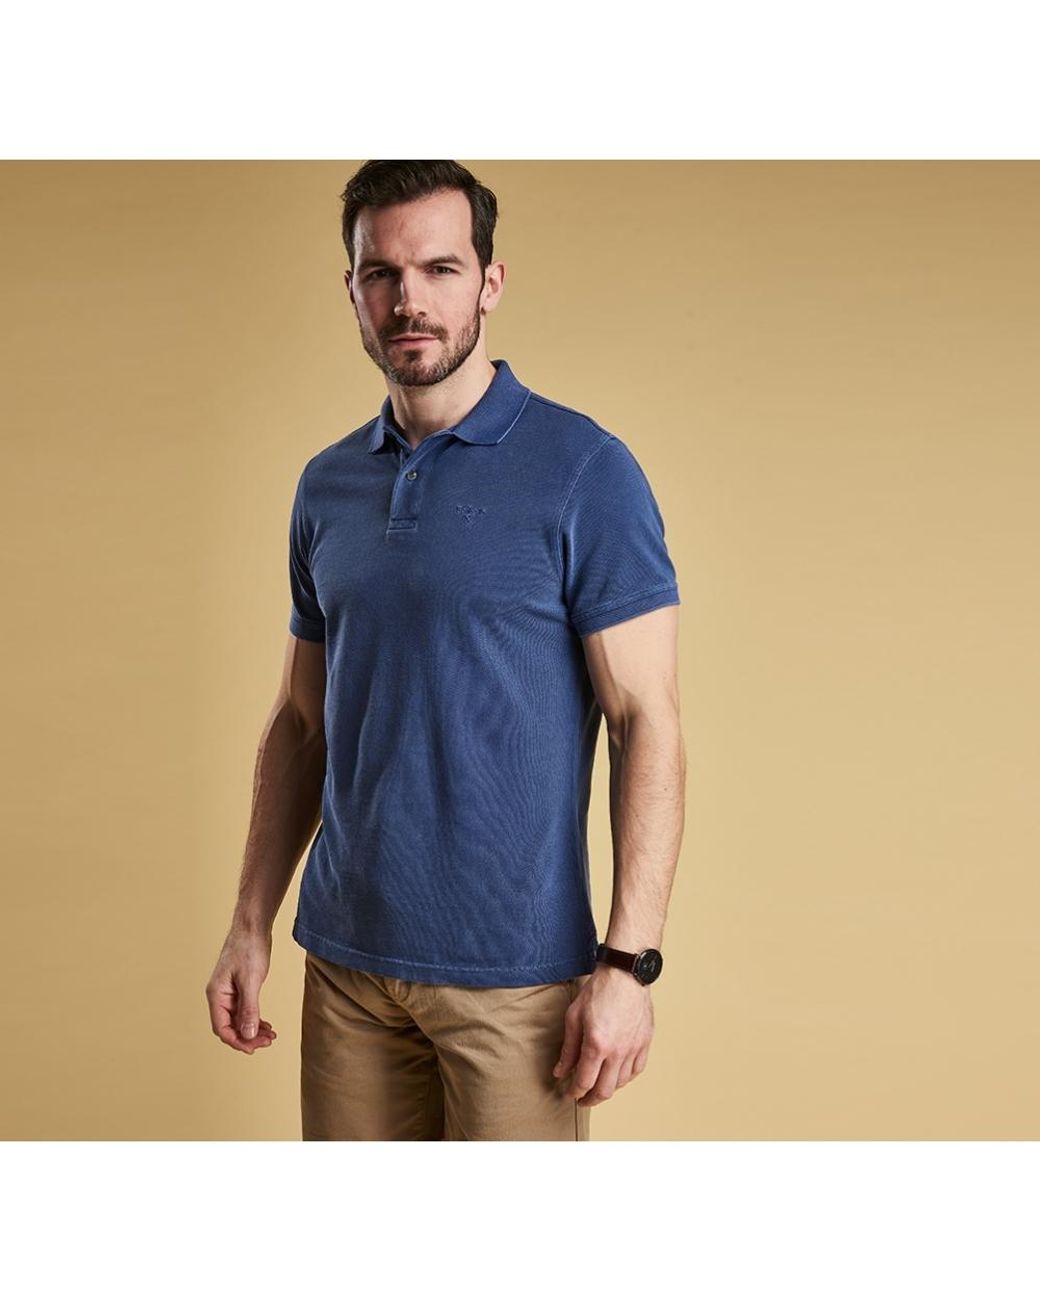 Barbour Cotton Washed Sports Polo in Navy (Blue) for Men - Lyst